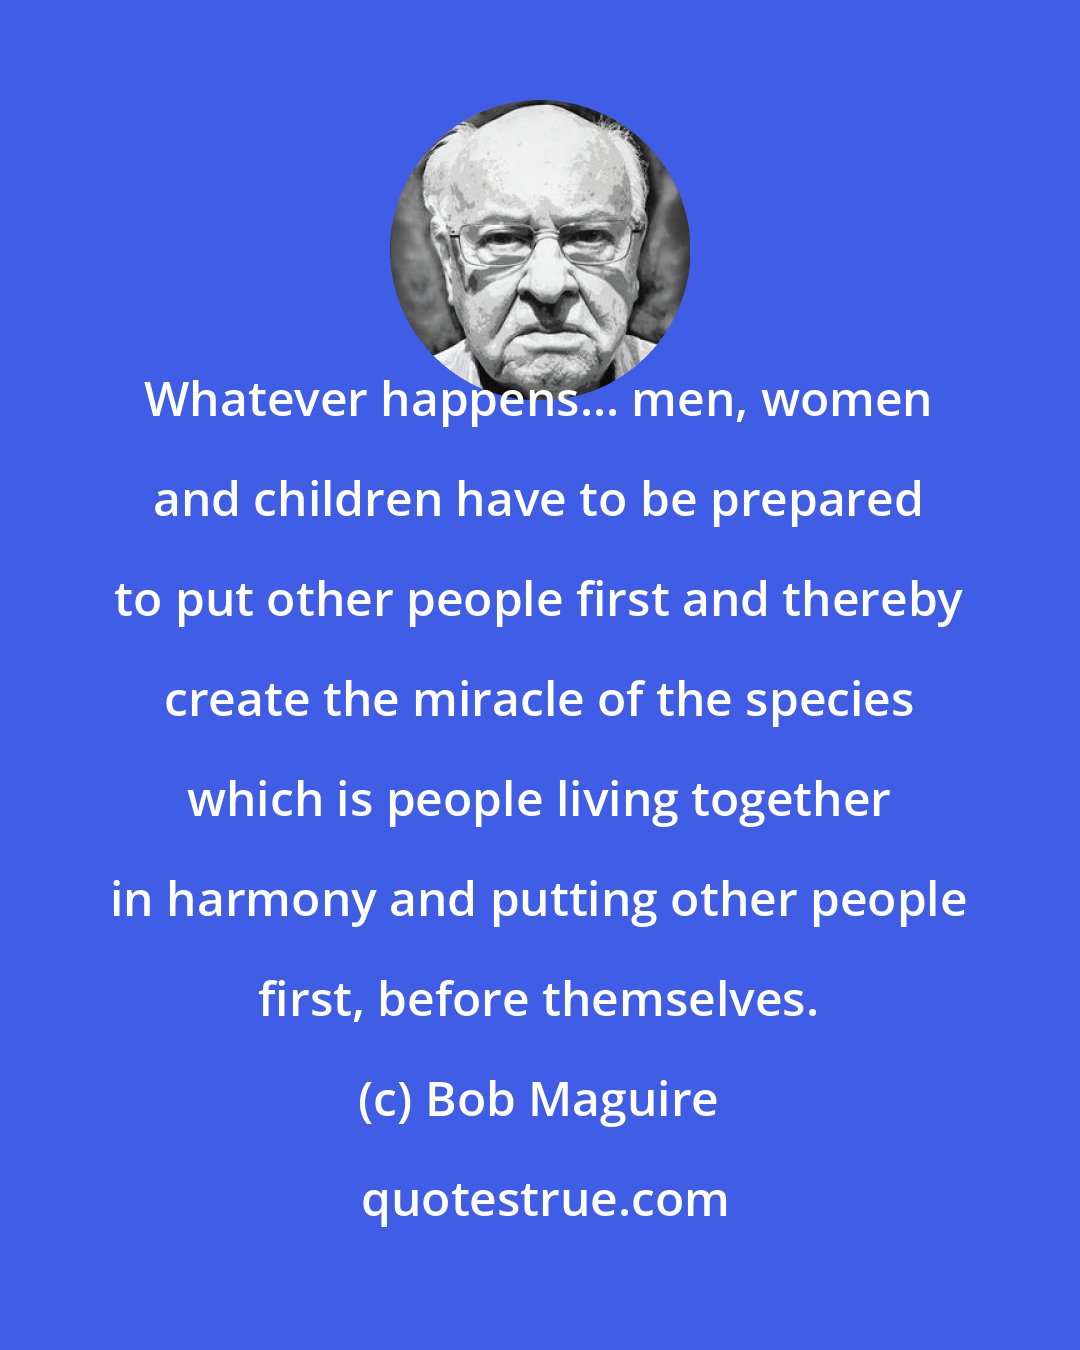 Bob Maguire: Whatever happens... men, women and children have to be prepared to put other people first and thereby create the miracle of the species which is people living together in harmony and putting other people first, before themselves.